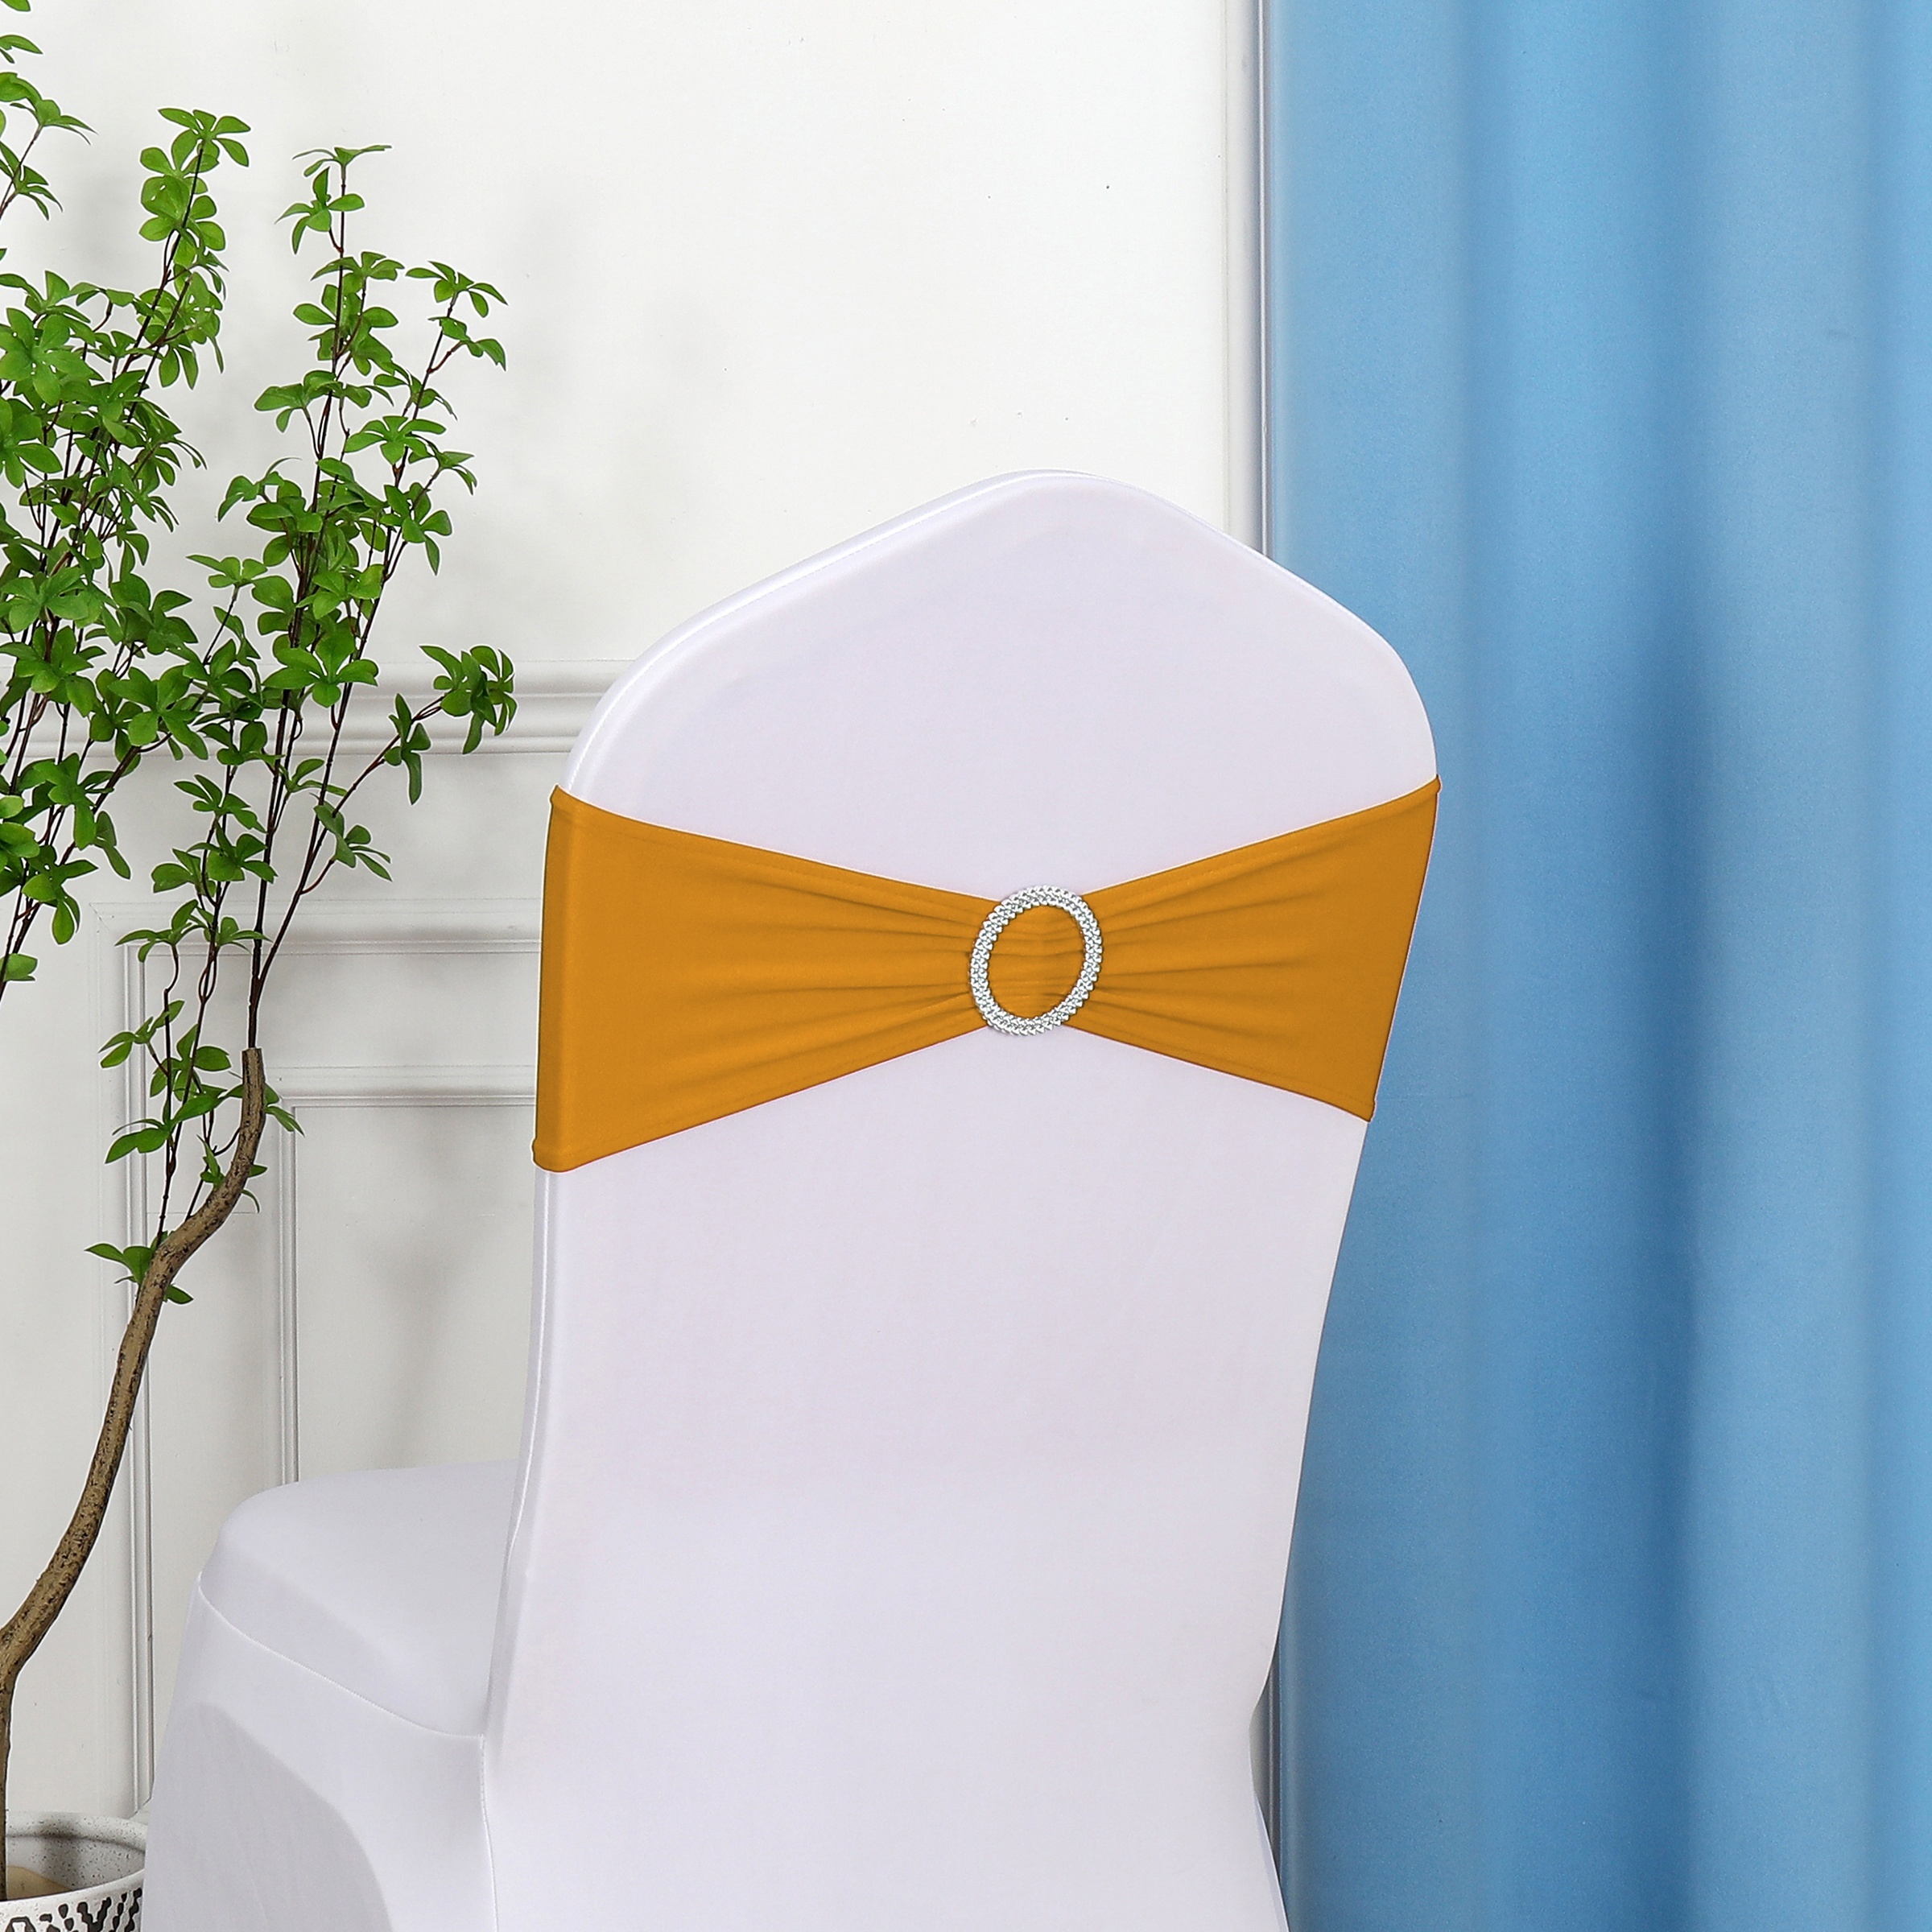 

20pcs, Elastic Chair Ties With Bowknot, Suitable For Wedding Parties, Ceremonies, And Reception Decorations